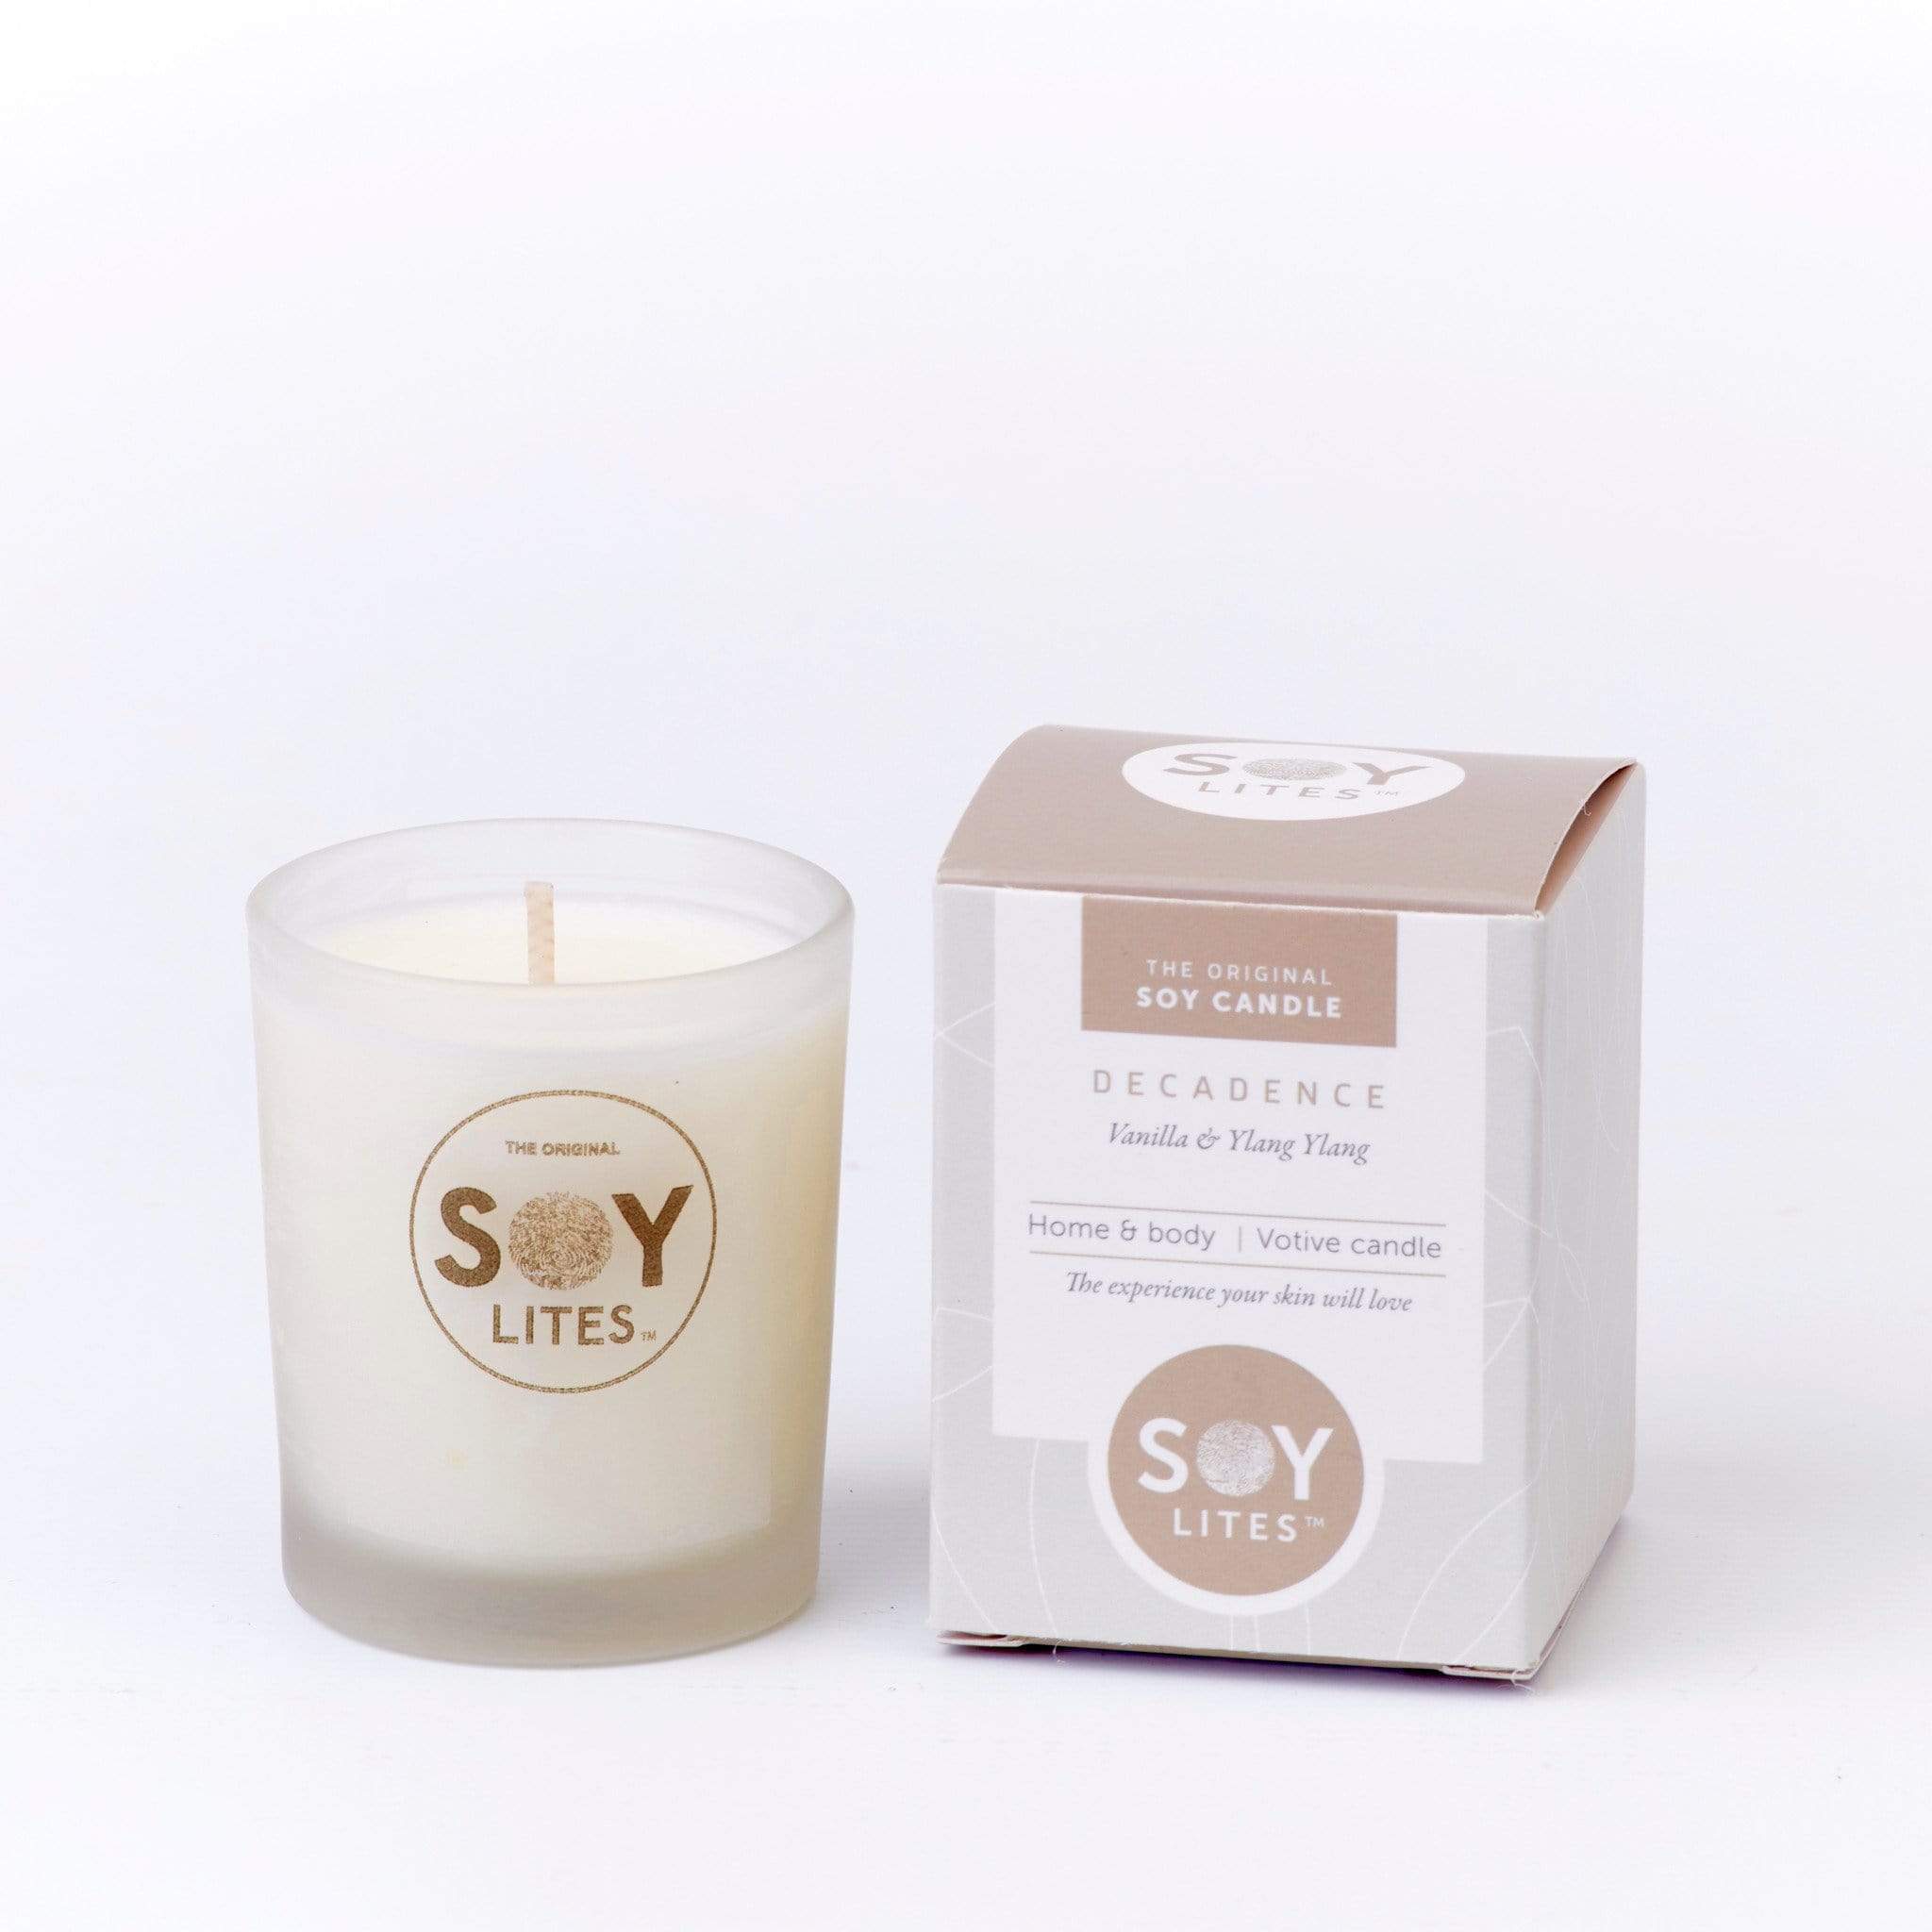 SoyLites Soy Aromatherapy Votive 70ml Decadence Votive Candle 70ml with Vanilla & Ylang Ylang